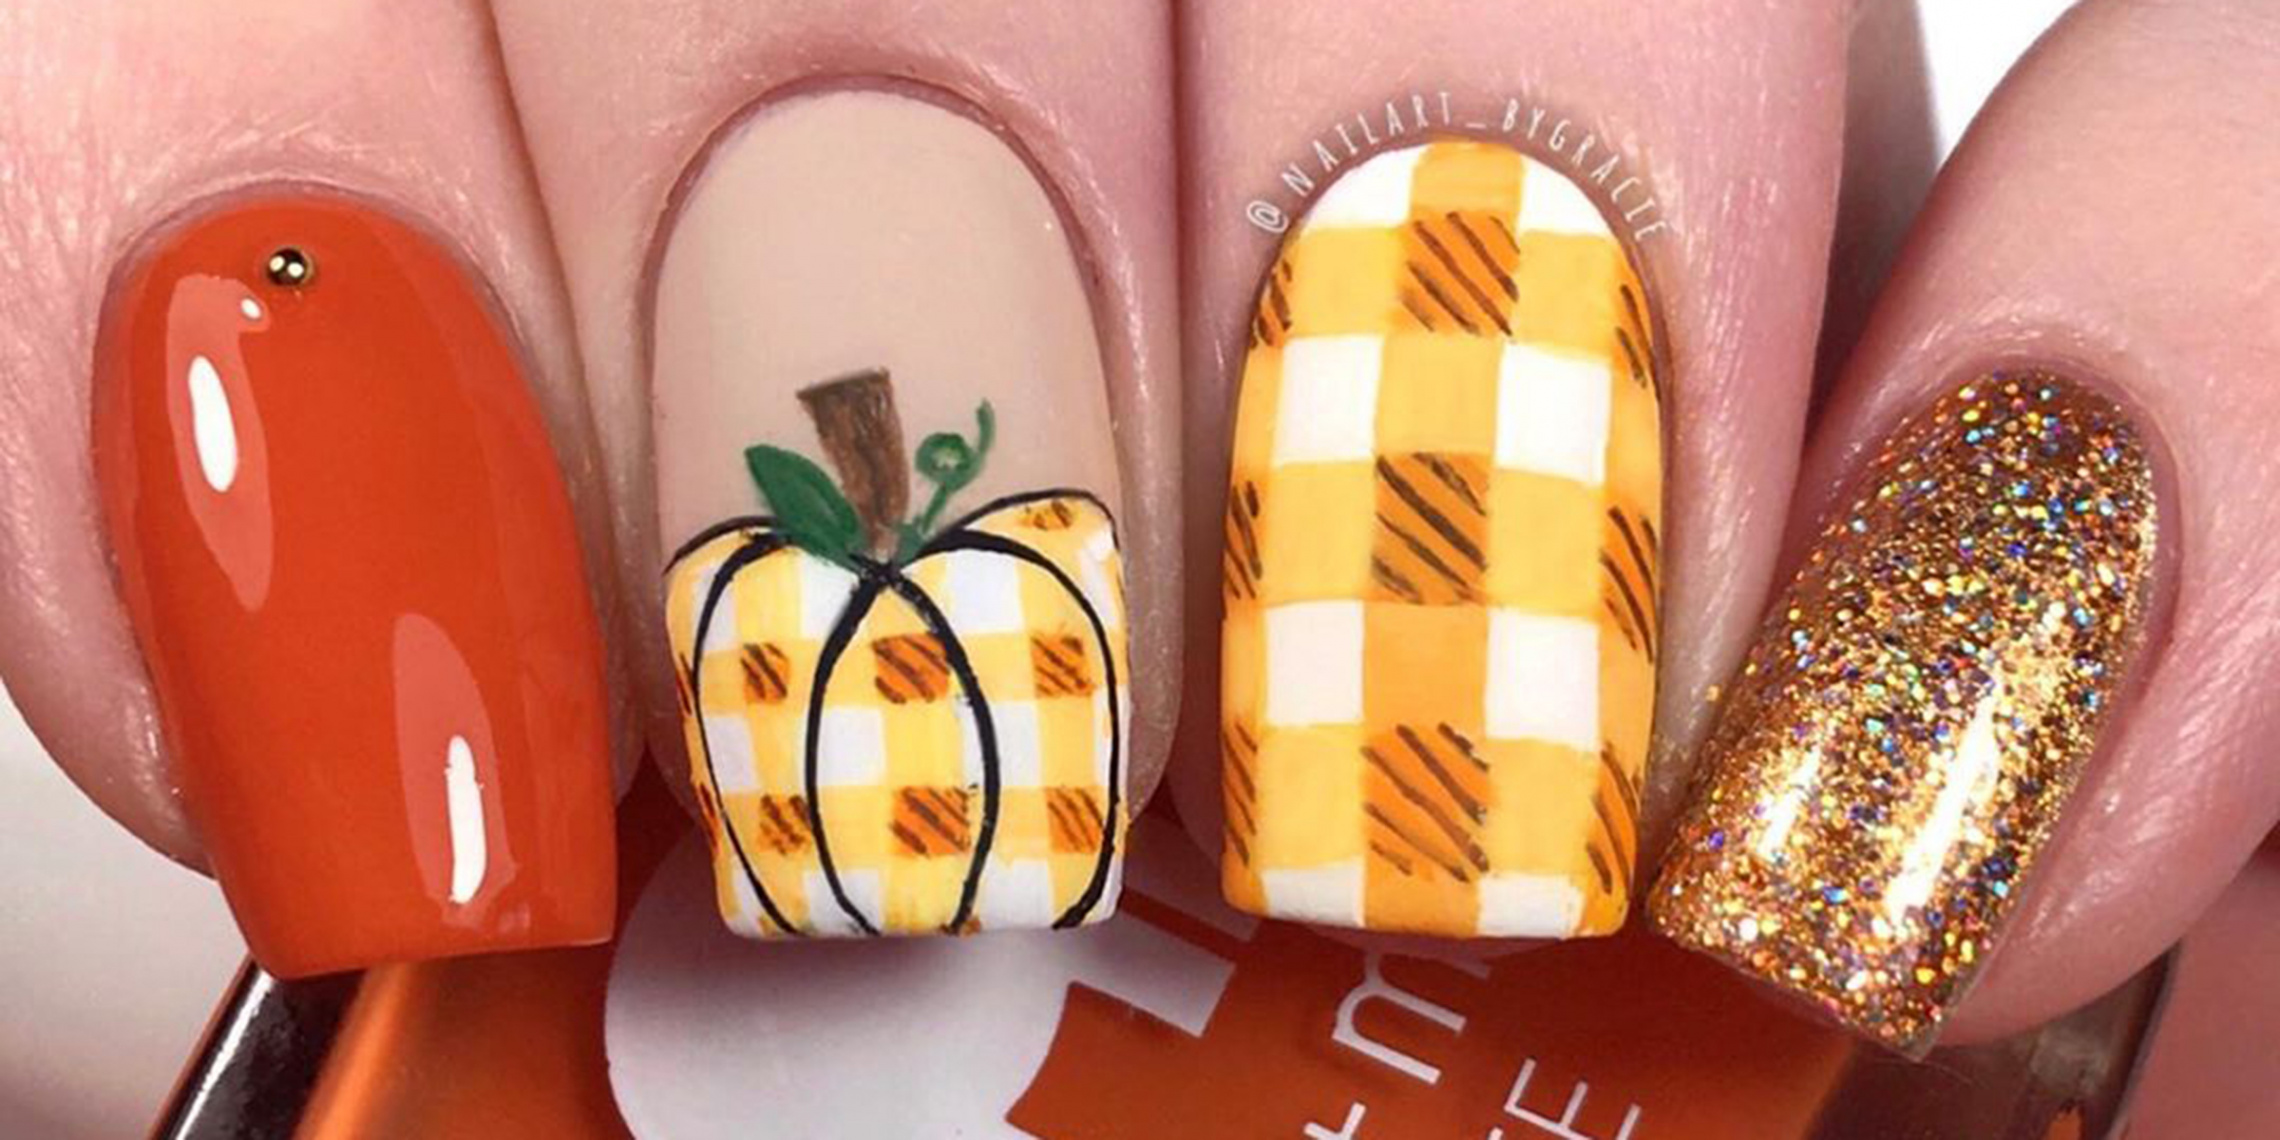 Thanksgiving nail art ideas for beginners and experts